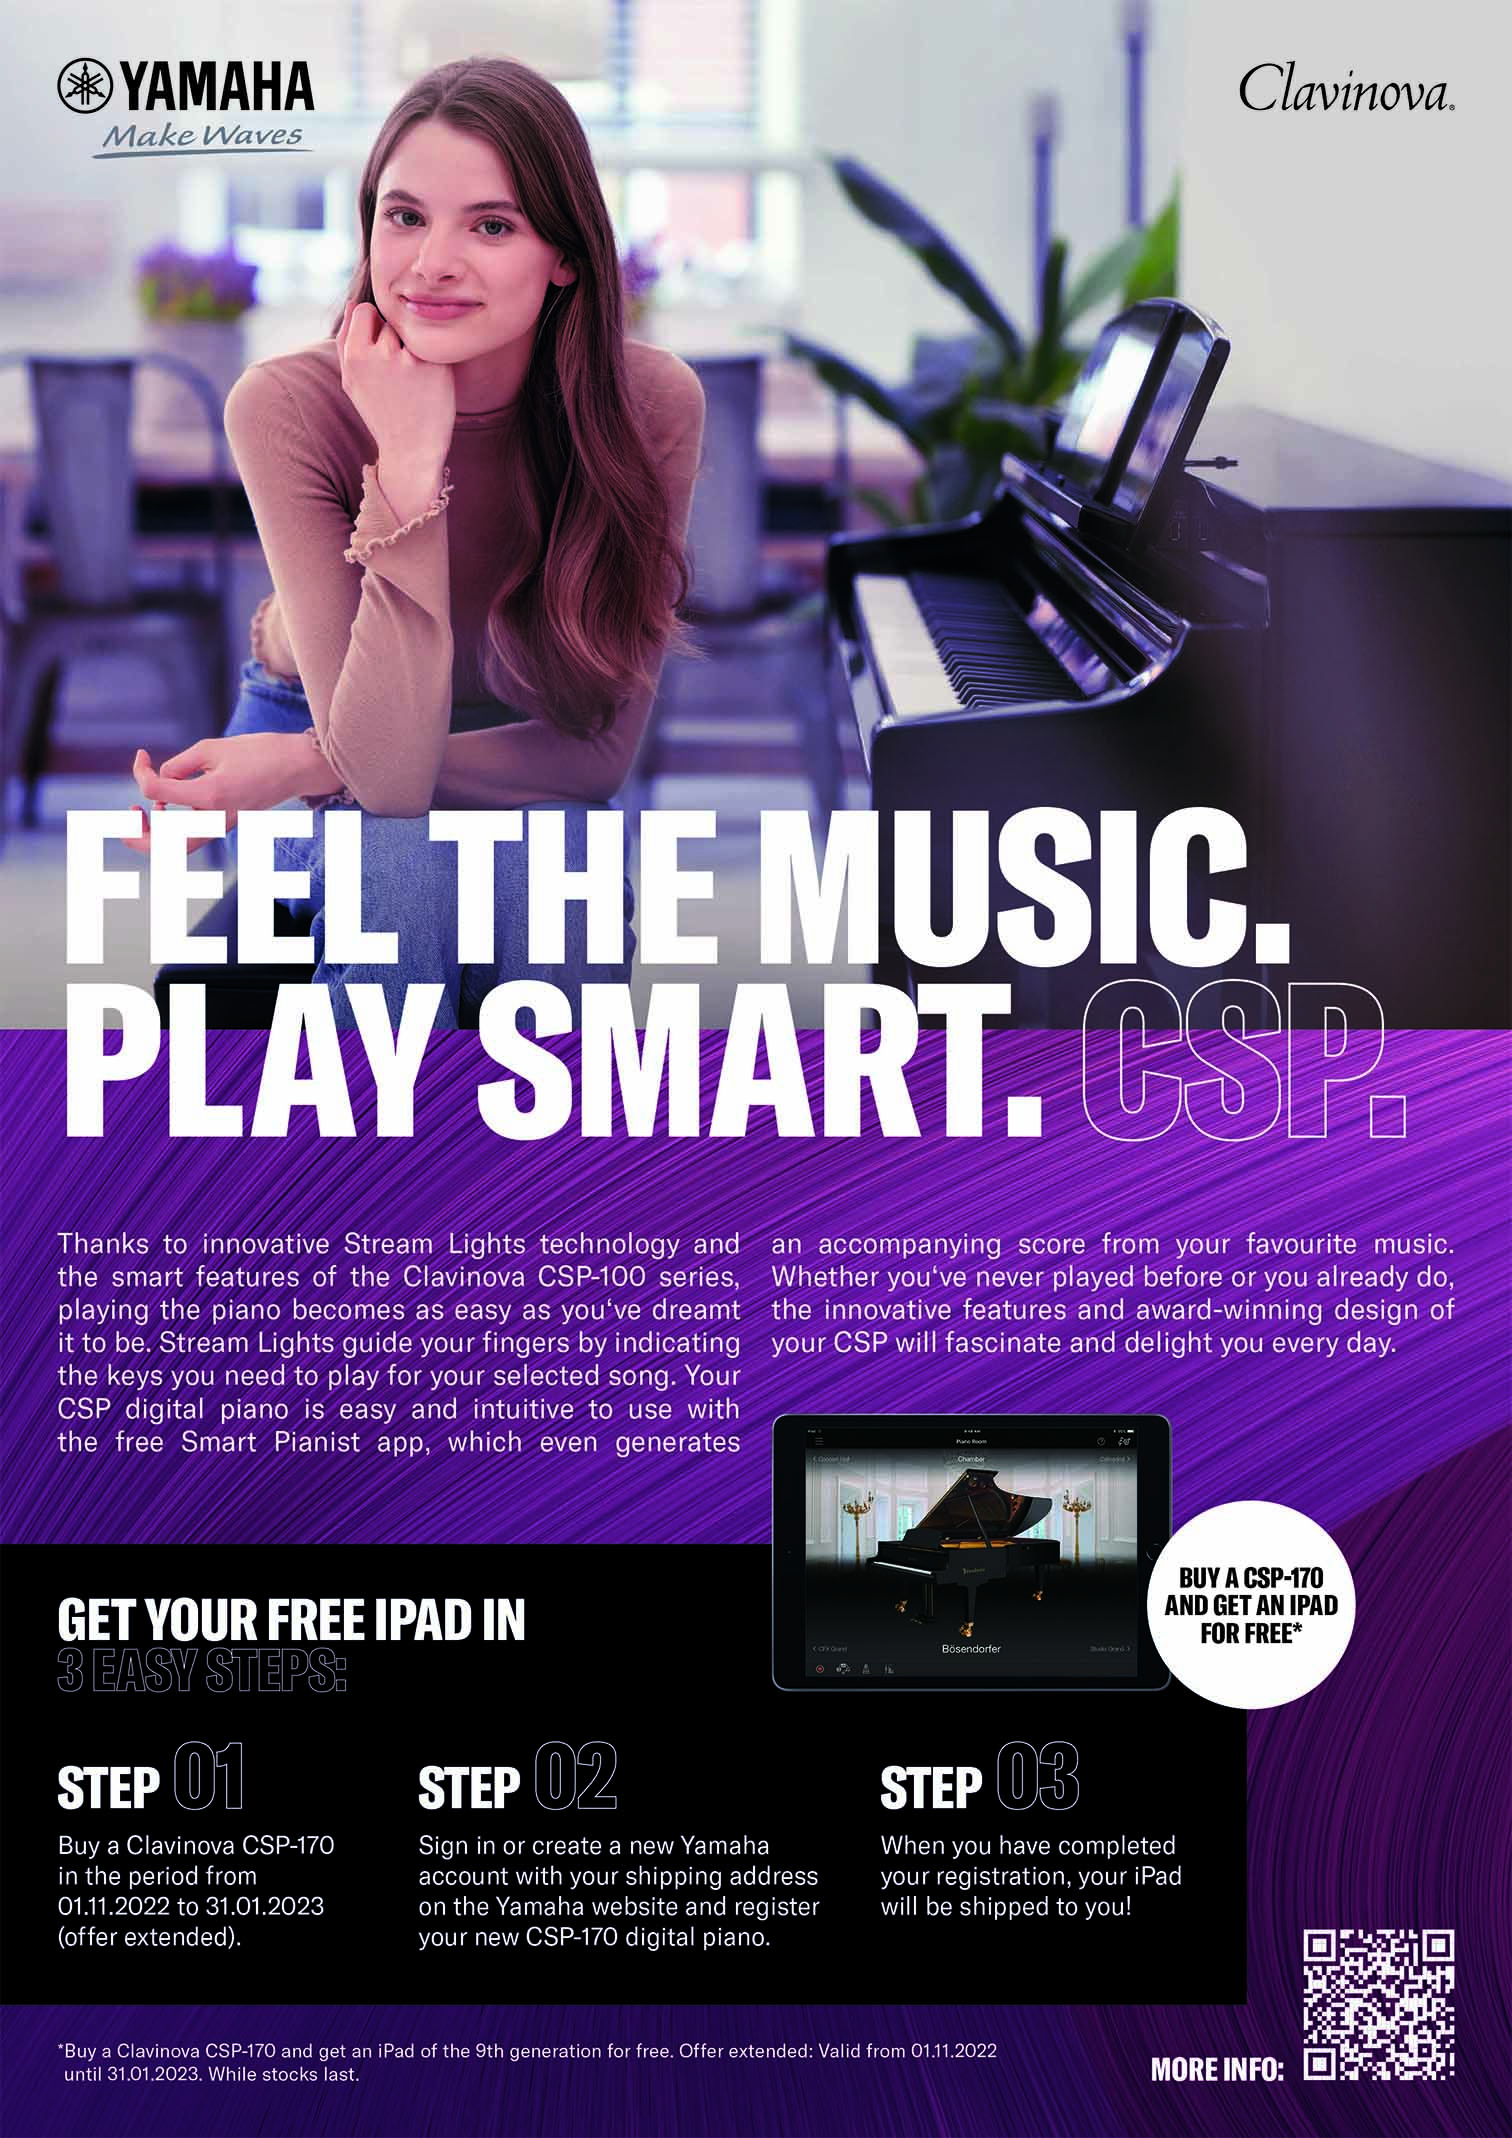 ®YAMAHA MakeWaves Clavinova. Feel ThE MUsic. PLAY SmART. Thanks to innovative Stream Lights technology and the smart features of the Clavinova CSP-100 series, playing the piano becomes as easy as you've dreamt it to be. Stream Lights guide your fingers by indicating the keys you need to play for your selected song. Your CSP digital piano is easy and intuitive to use with the free Smart Pianist app, which even generates an accompanying score from your favourite music. Whether you've never played before or you already do, the innovative features and award-winning design of your CSP will fascinate and delight you every day. GET YOUR FREE IPAD IN BUY A CSP-170 AND GET AN IPAD FOR FREE* Easy Steps: Step Wi STEP STEP (03 Buy a Clavinova CSP-170 in the period from 01.11.2022 to 15.12.2022. Sign in or create a new Yamaha account with your shipping address on the Yamaha website and register your new CSP-170 digital piano. When you have completed your registration, your iPad will be shipped to you! "Buy a Clavinova CSP-170 and get an iPad of the 9th generation for free. Valid from 01.11. until 15.12.2022. While stocks last.